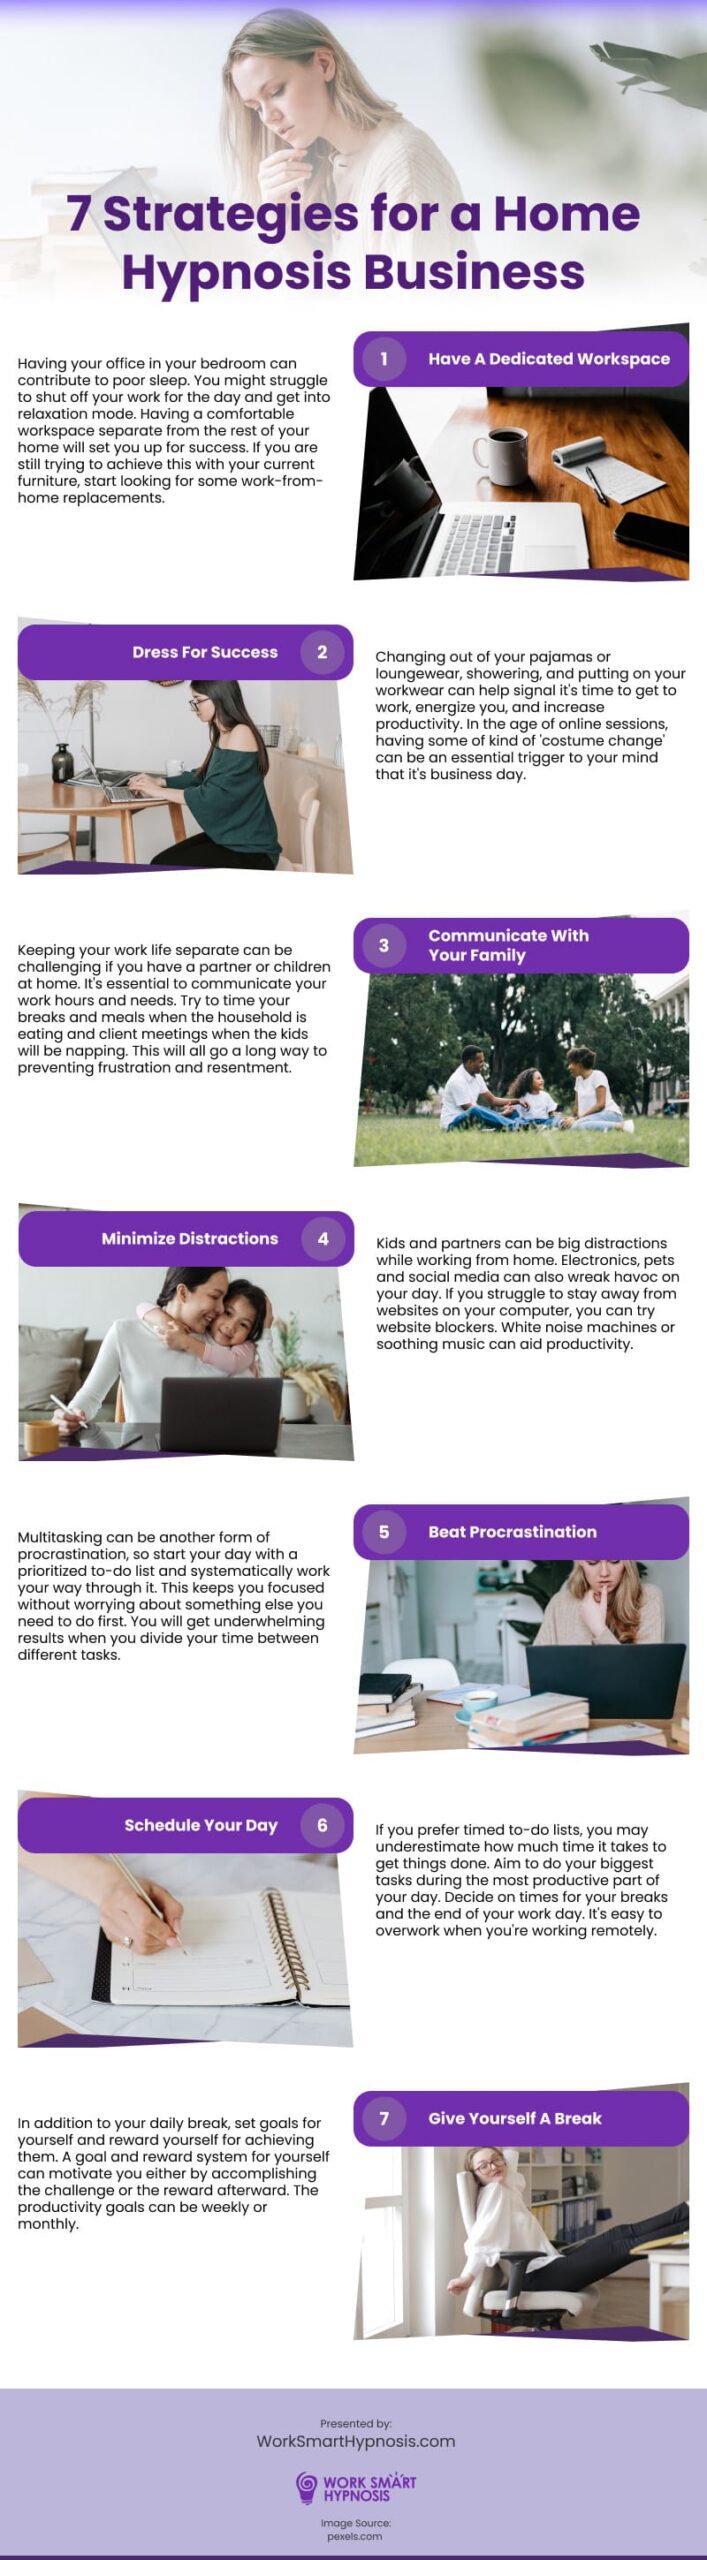 7 Strategies for a Home Hypnosis Business Infographic